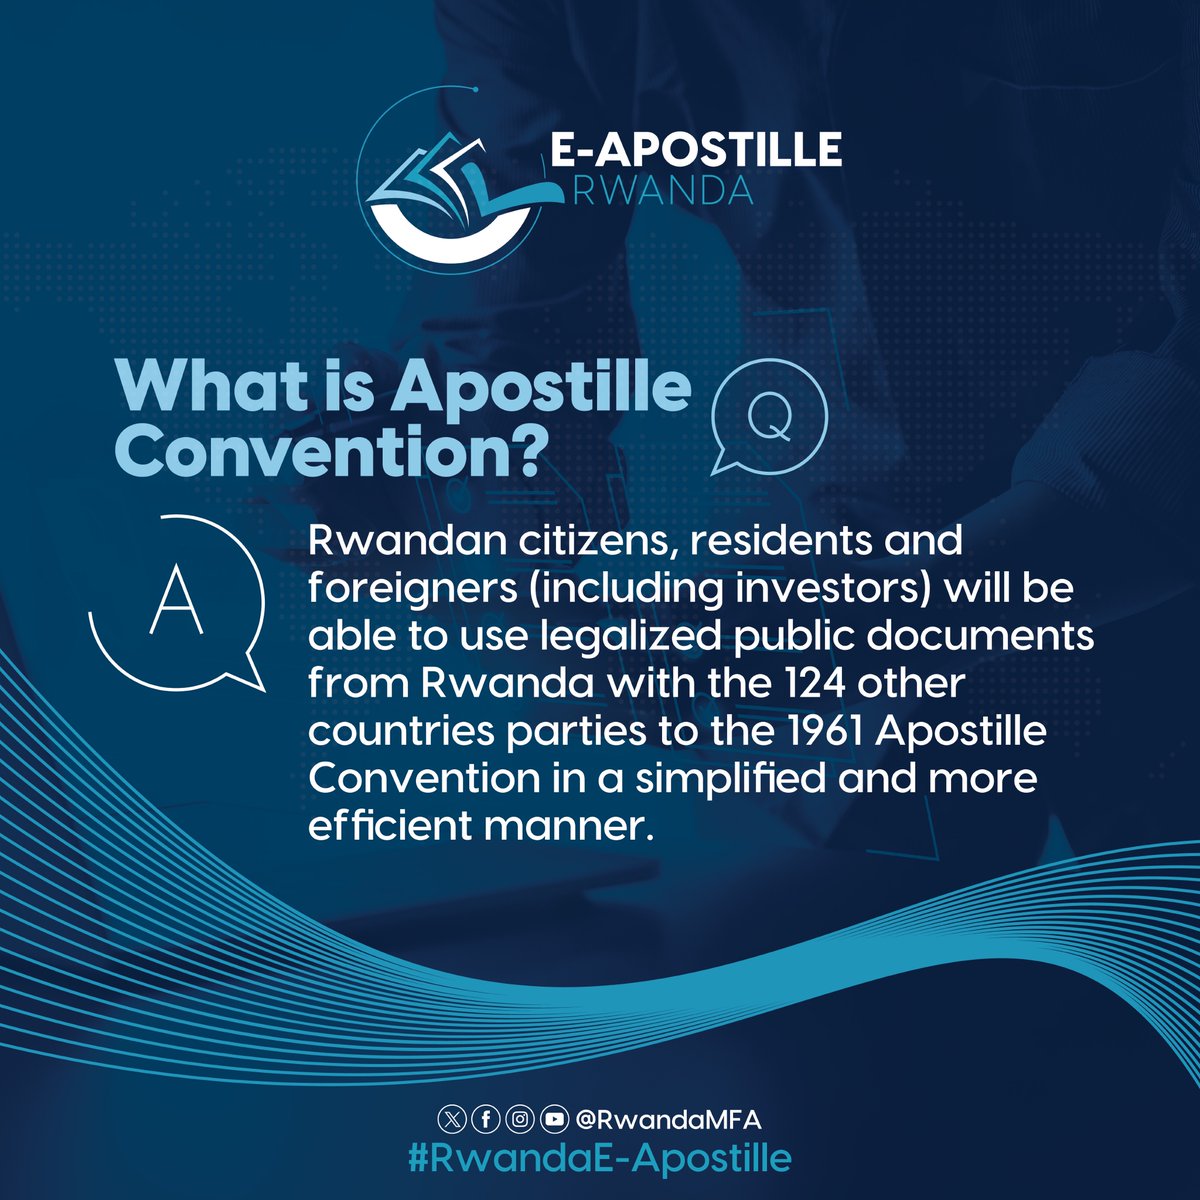 Through #RwandaE-Apostille, Rwandan citizens, residents and foreigners (including investors) will be able to use legalized public documents from Rwanda with the 124 other countries parties to the 1961 Apostille Convention in a simplified and more efficient manner.